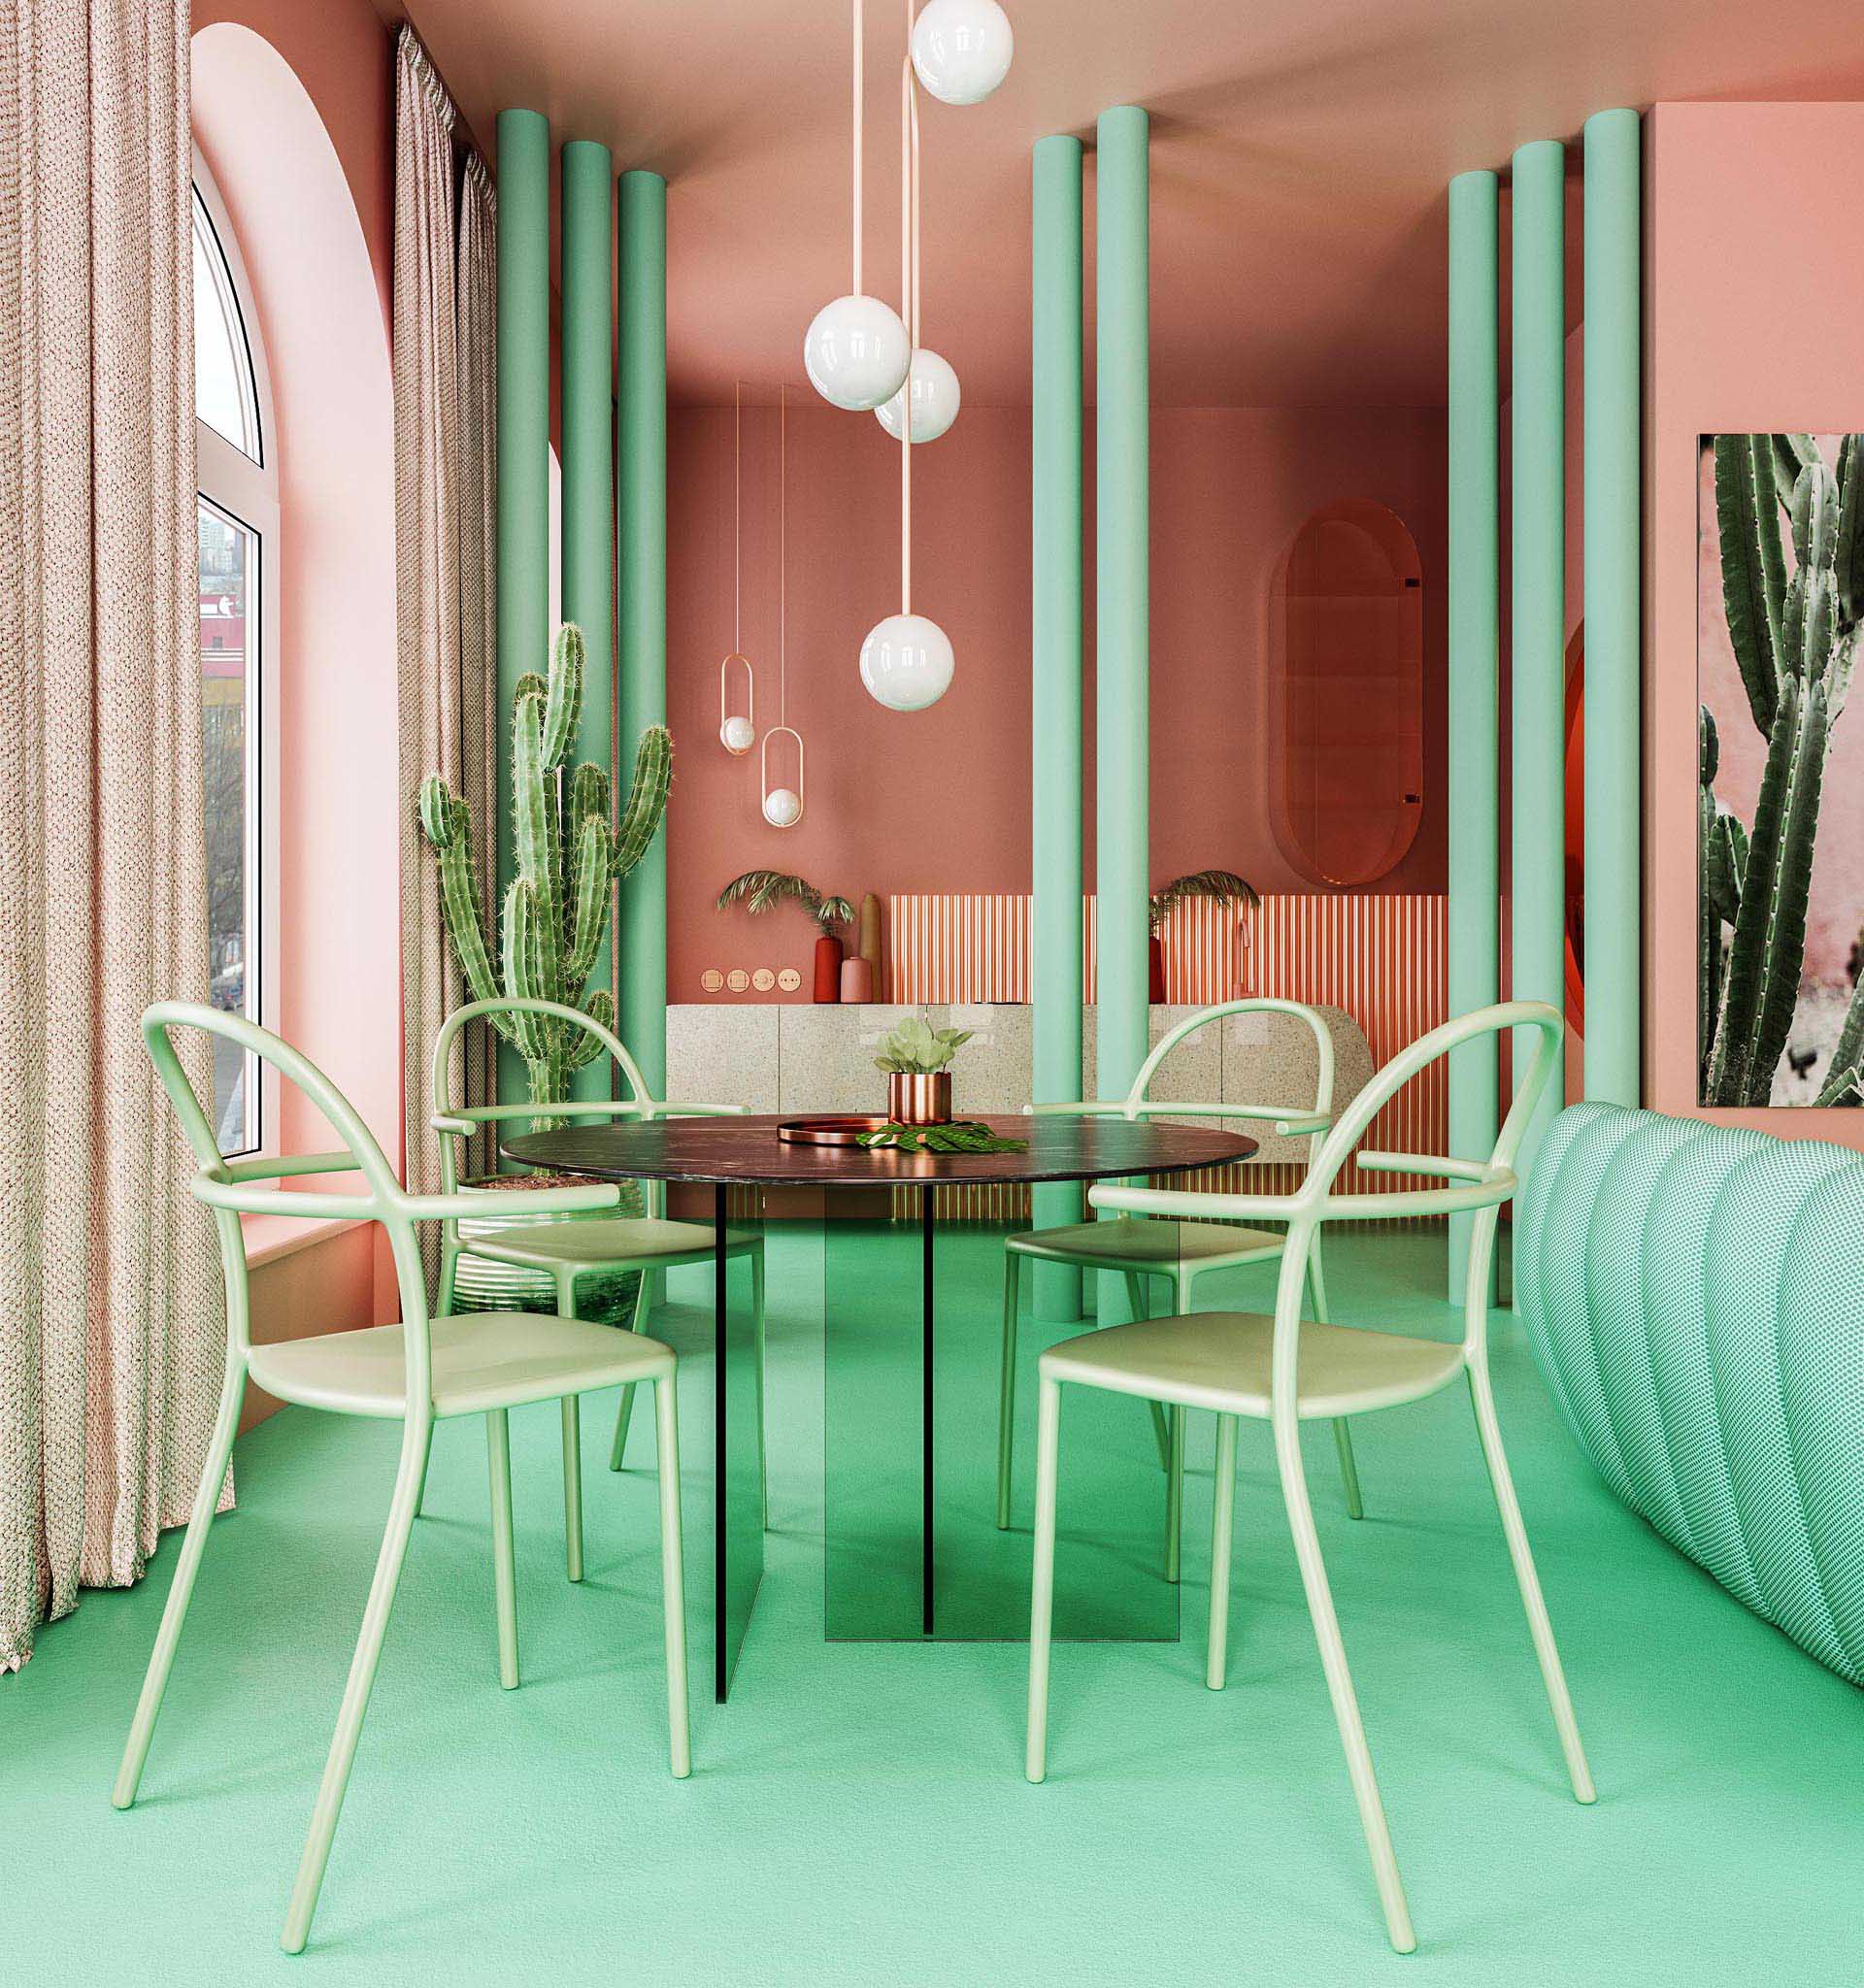 This pink and green dining area features a custom designed dining table with a marble top and glass base. Floor-to-ceiling curtains, green columns, and pendant lights draw the eye upwards to the high ceilings. 